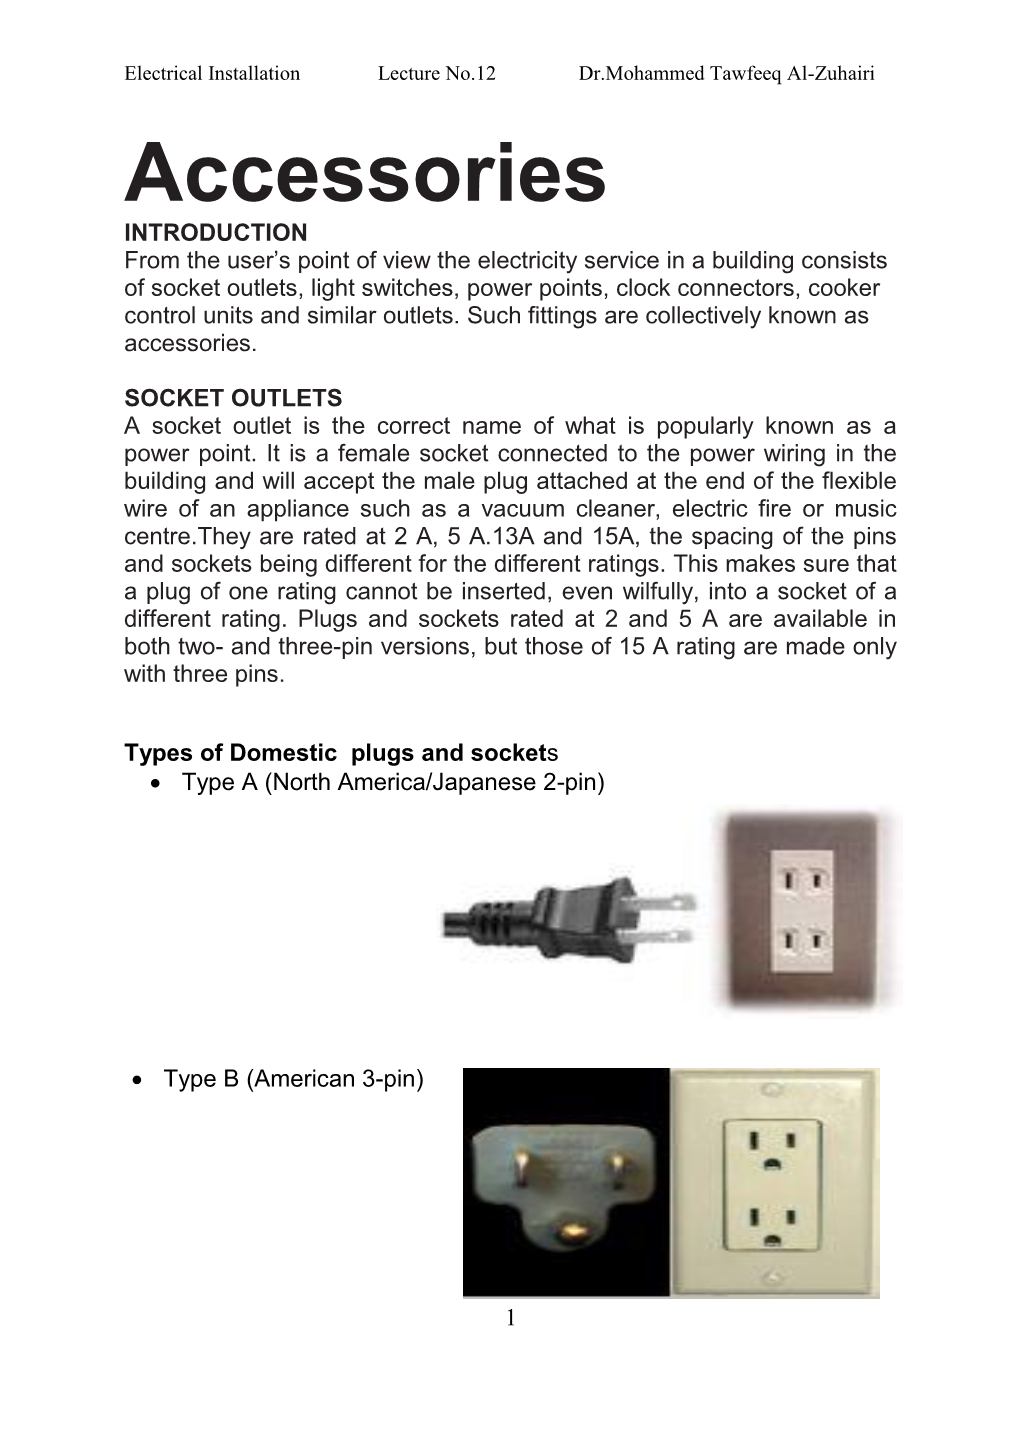 Socket Outlets, Light Switches, Power Points, Clock Connectors, Cooker Control Units and Similar Outlets